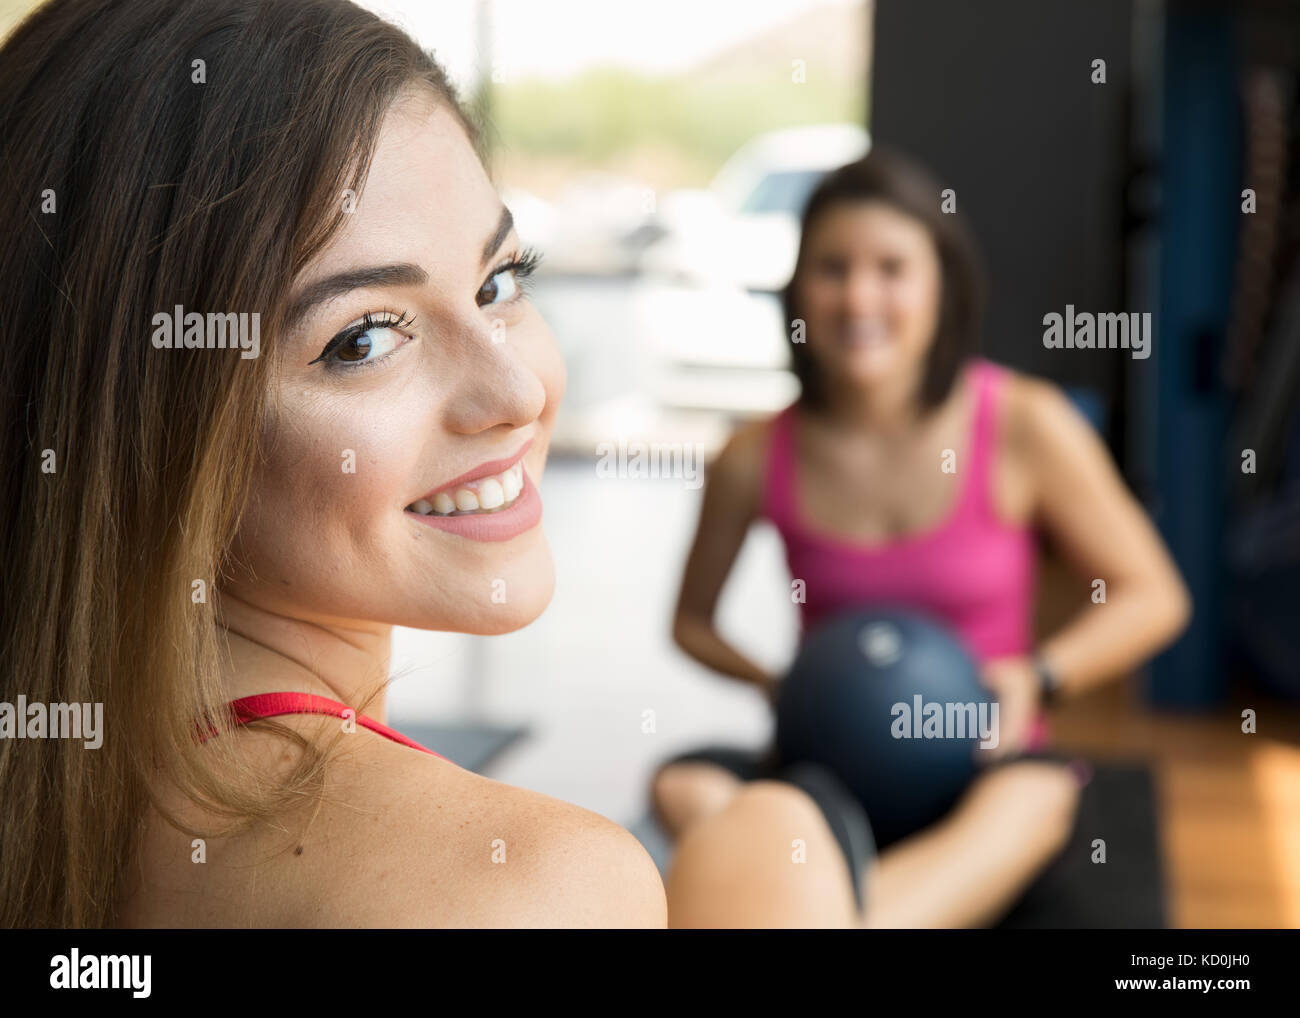 Women training with medicine ball in gym Stock Photo